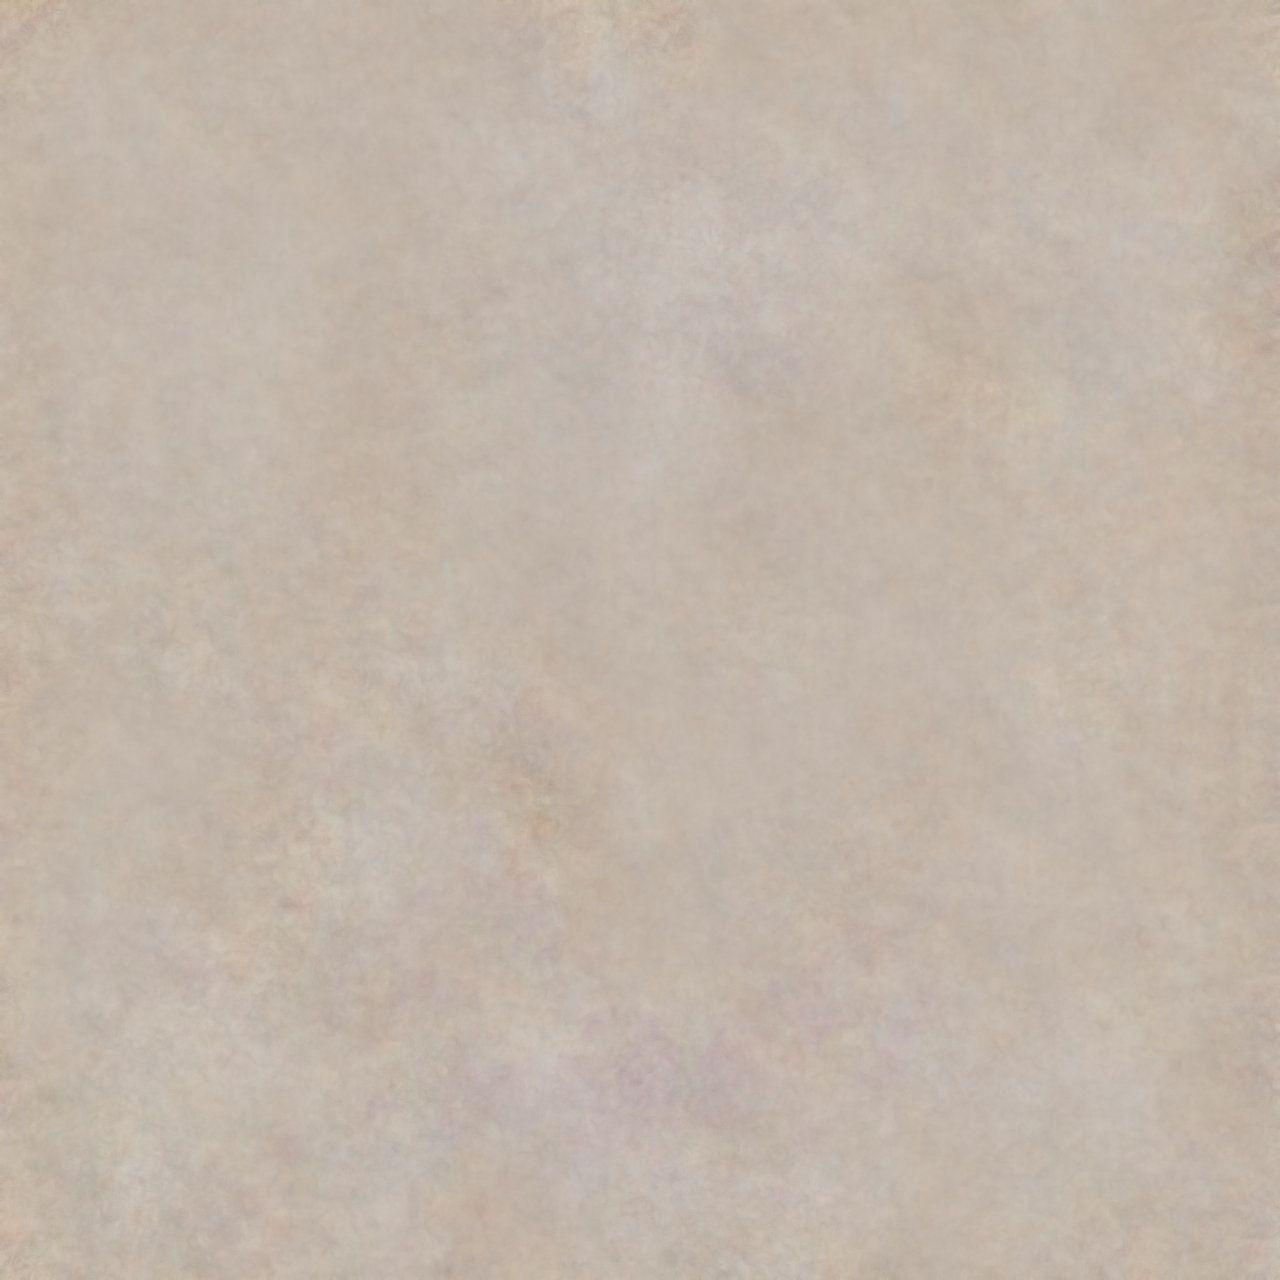 Background 5 Neutral Taupe TExture